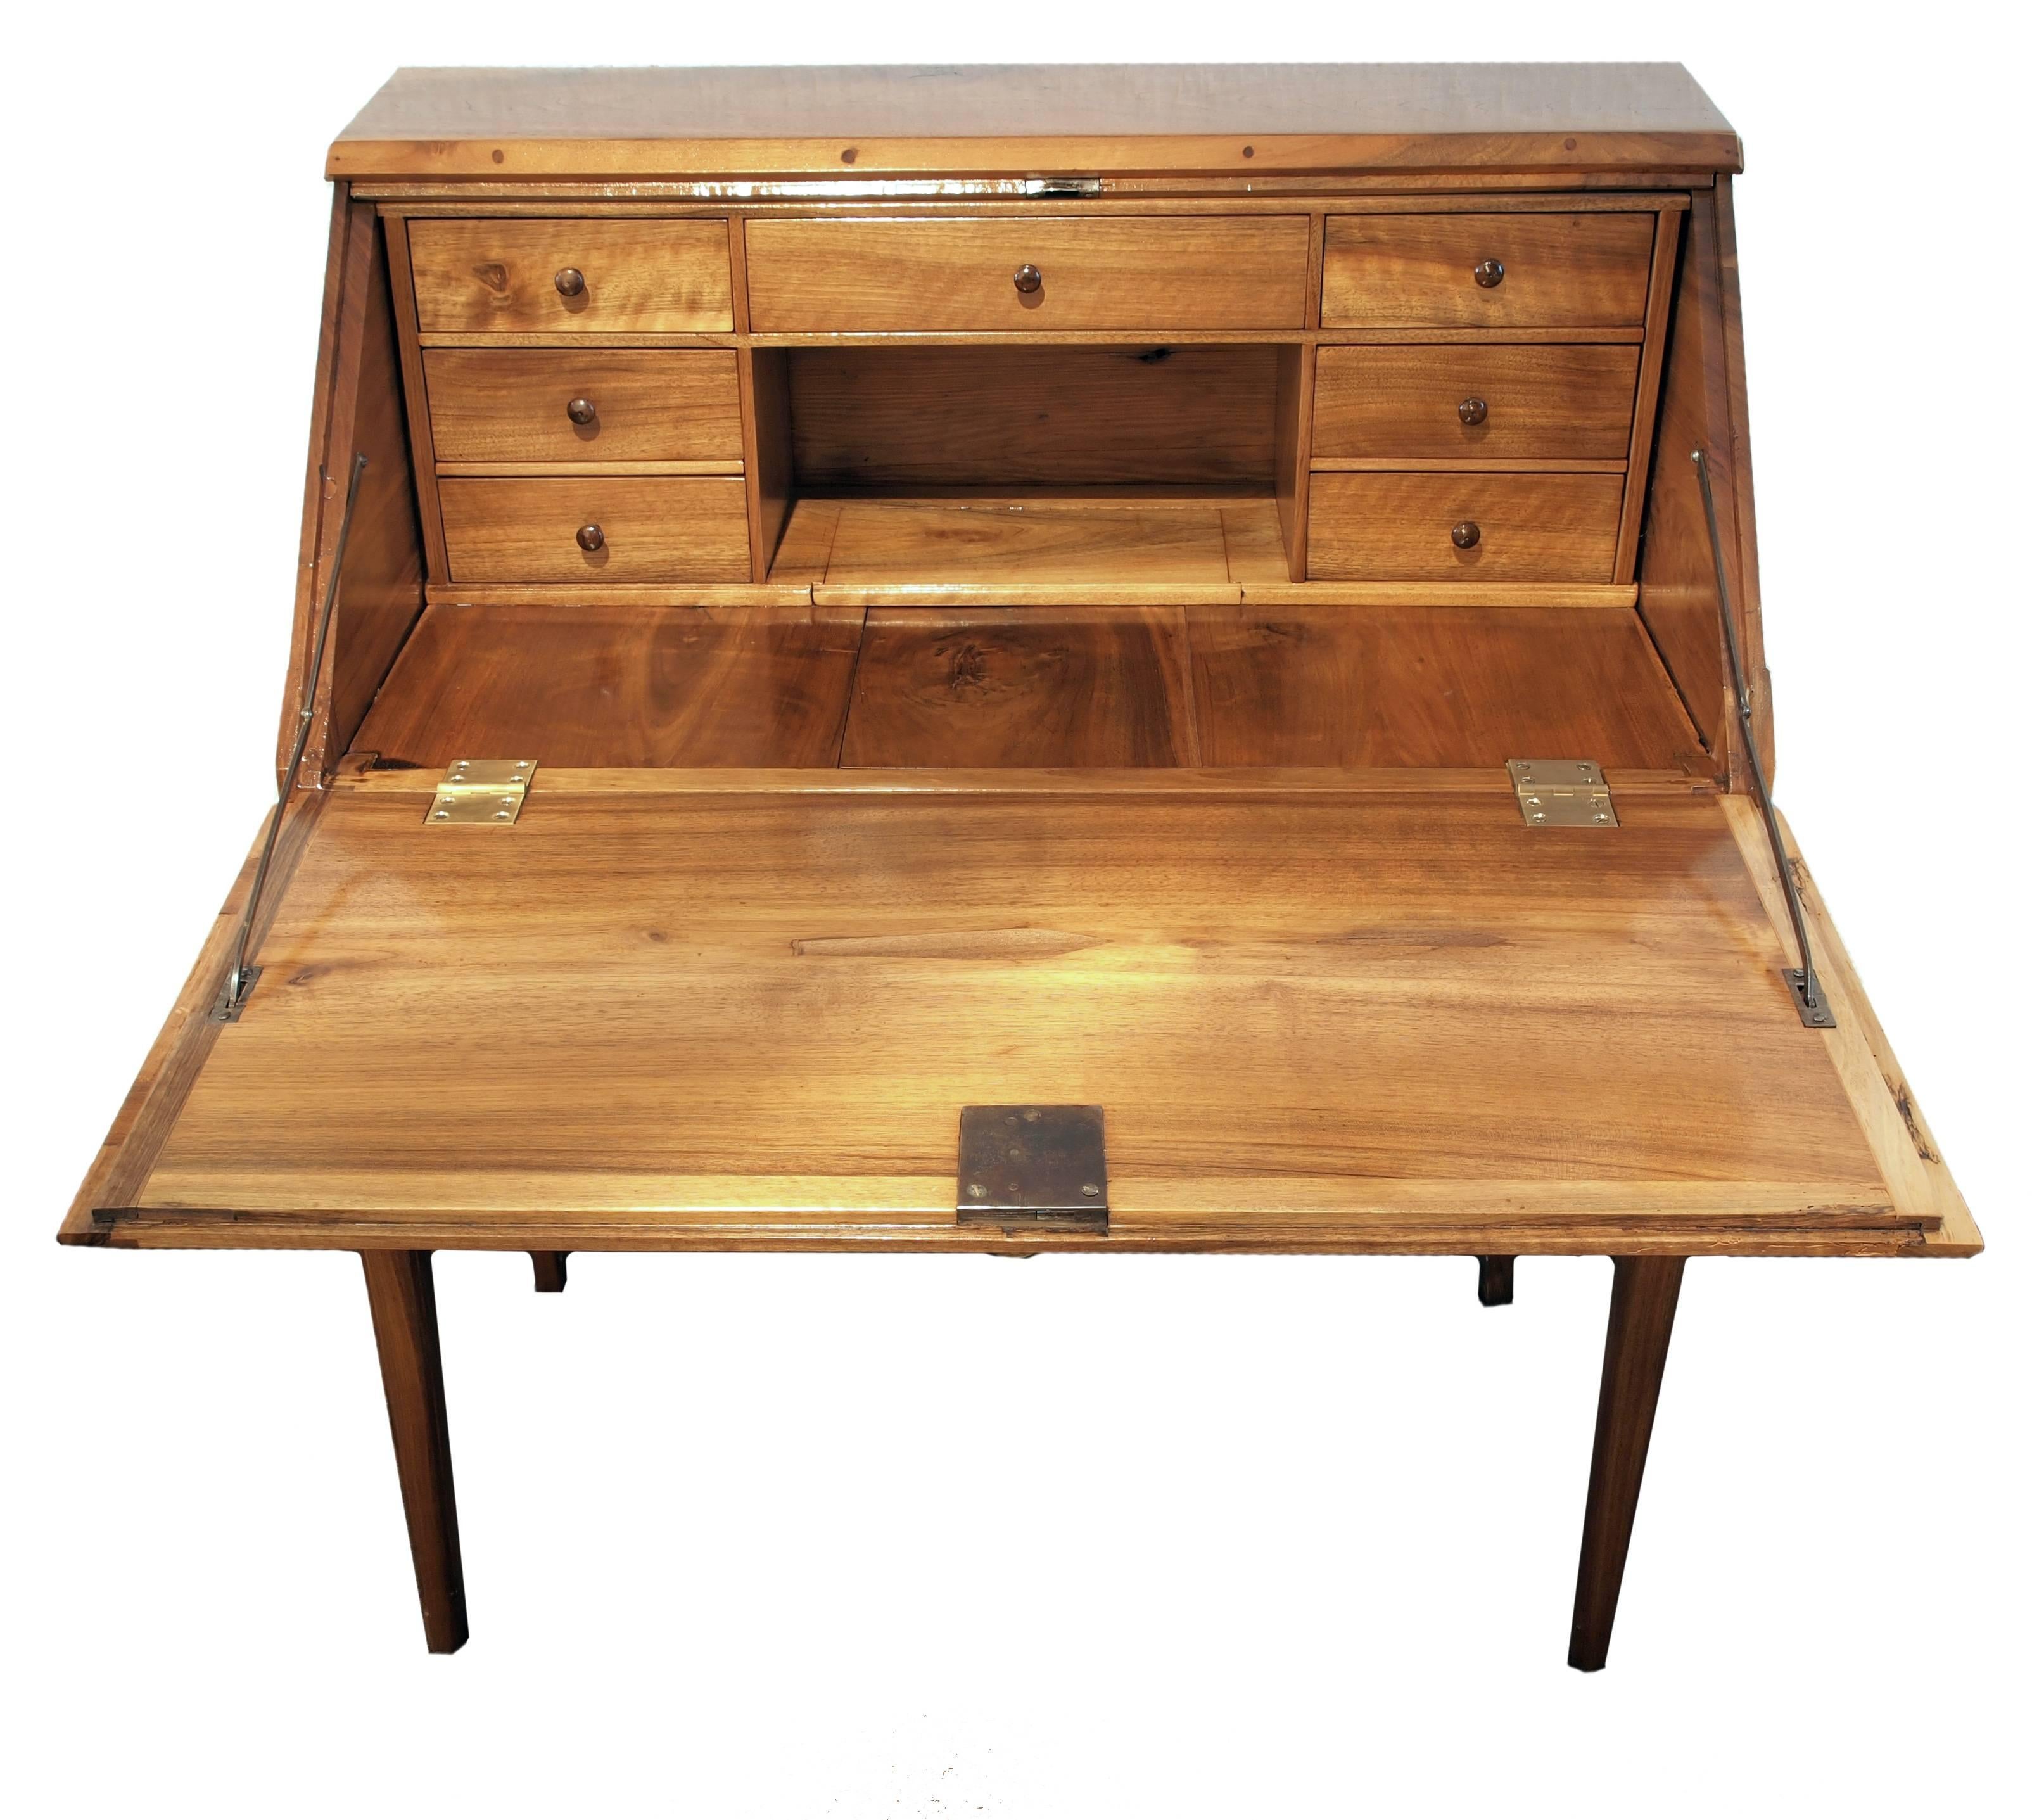 Very rare small oblique flap secretary made of solid walnut from the time of the Empire. Two drawers in closed condition. Inside there are 7 drawers and an open compartment as well as a secret compartment in the floor. The back wall and the inner of